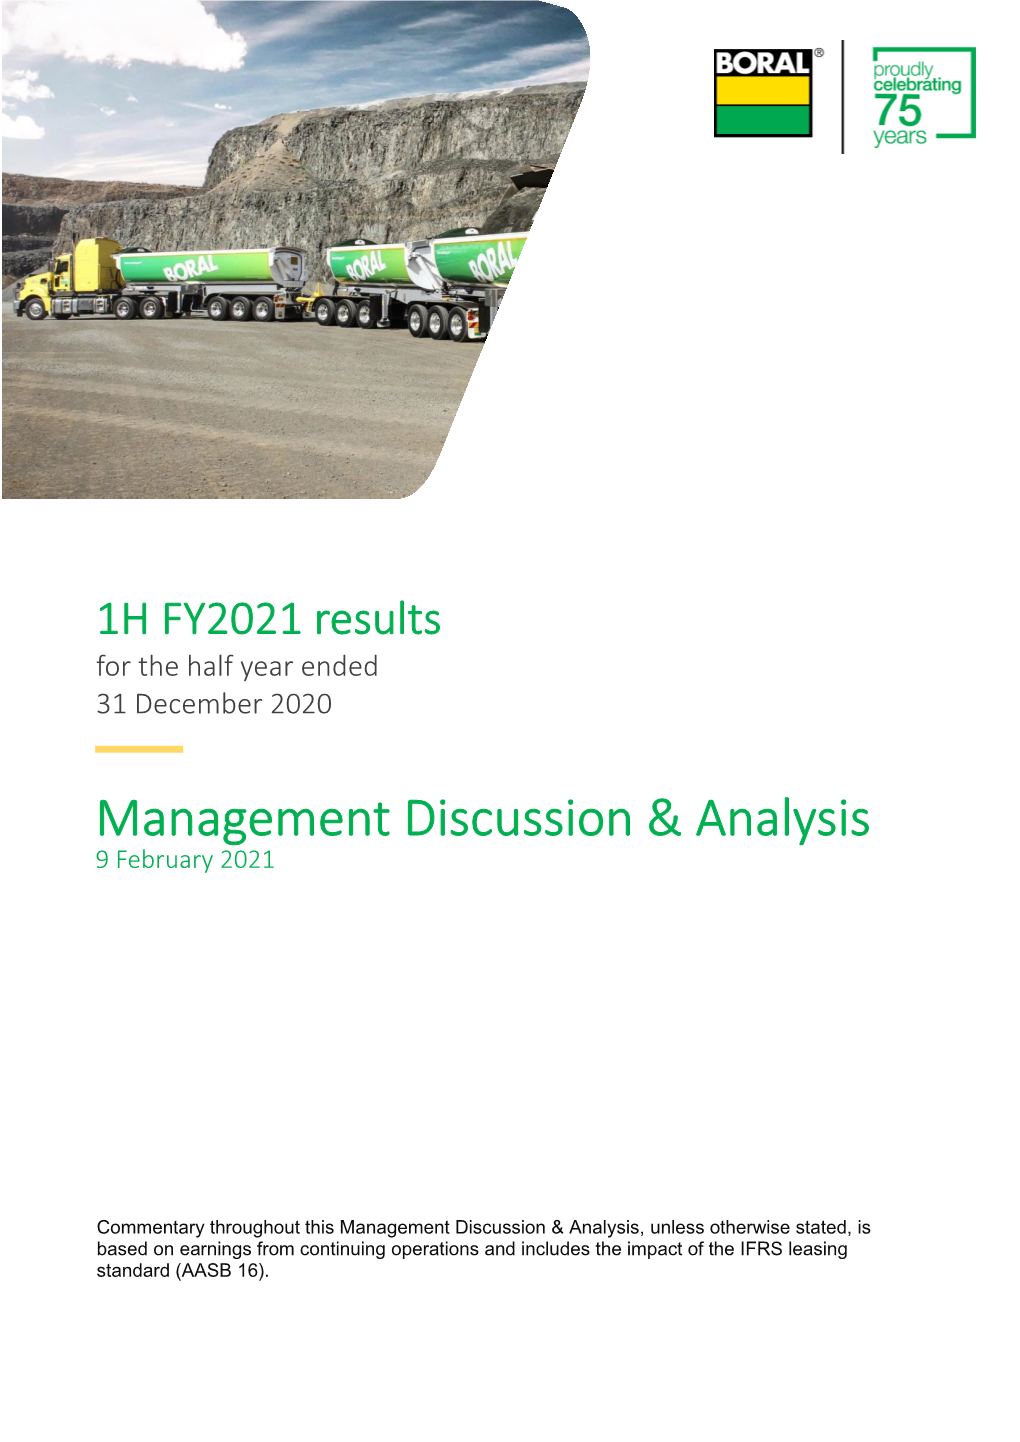 Management Discussion & Analysis